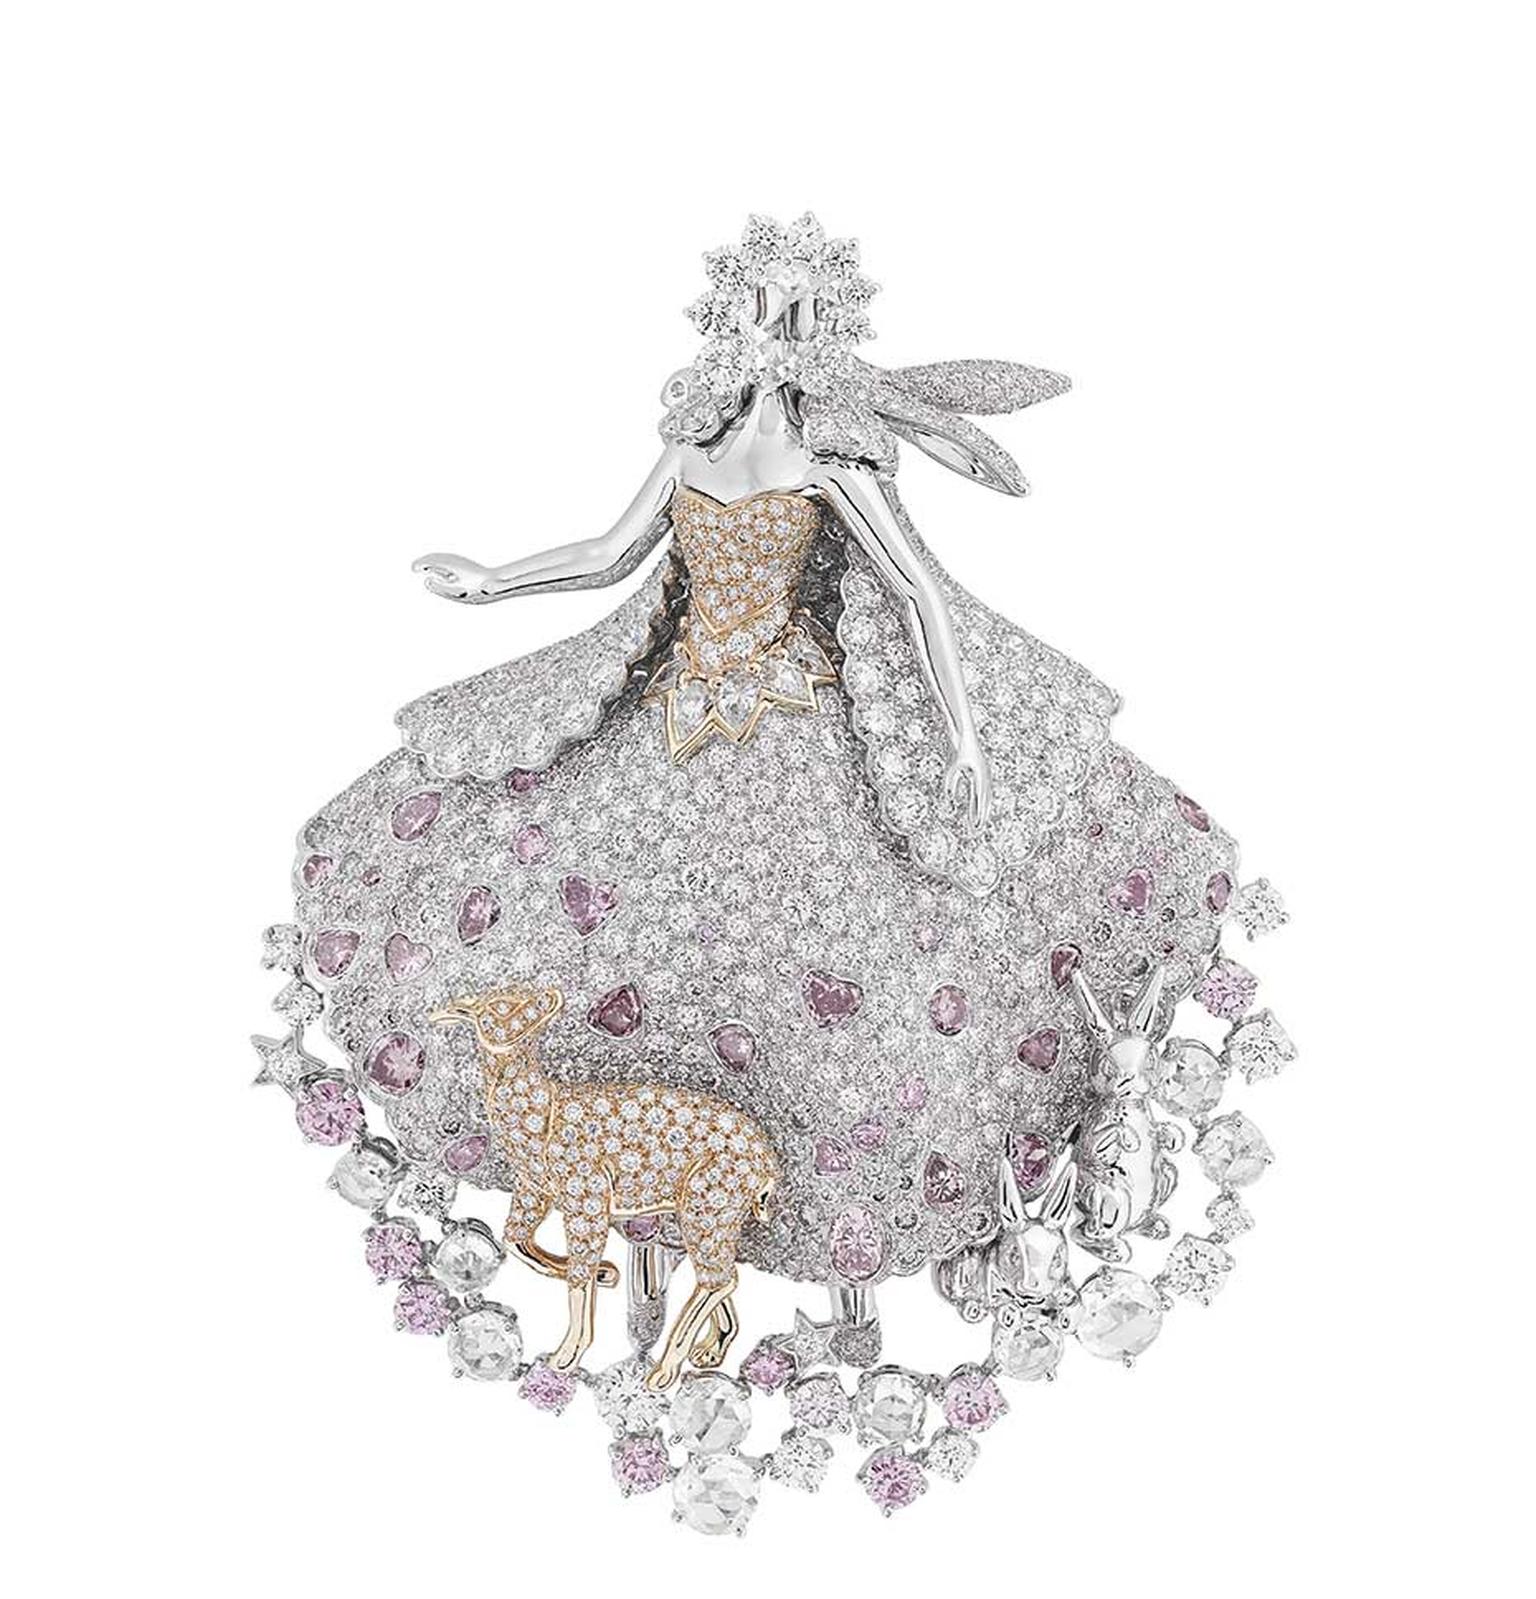 Van Cleef & Arpels Peau d'Ane Enchanted Forest collection Donkey Skin clip in white gold with round, square and pear-cut white, pink and grey diamonds.